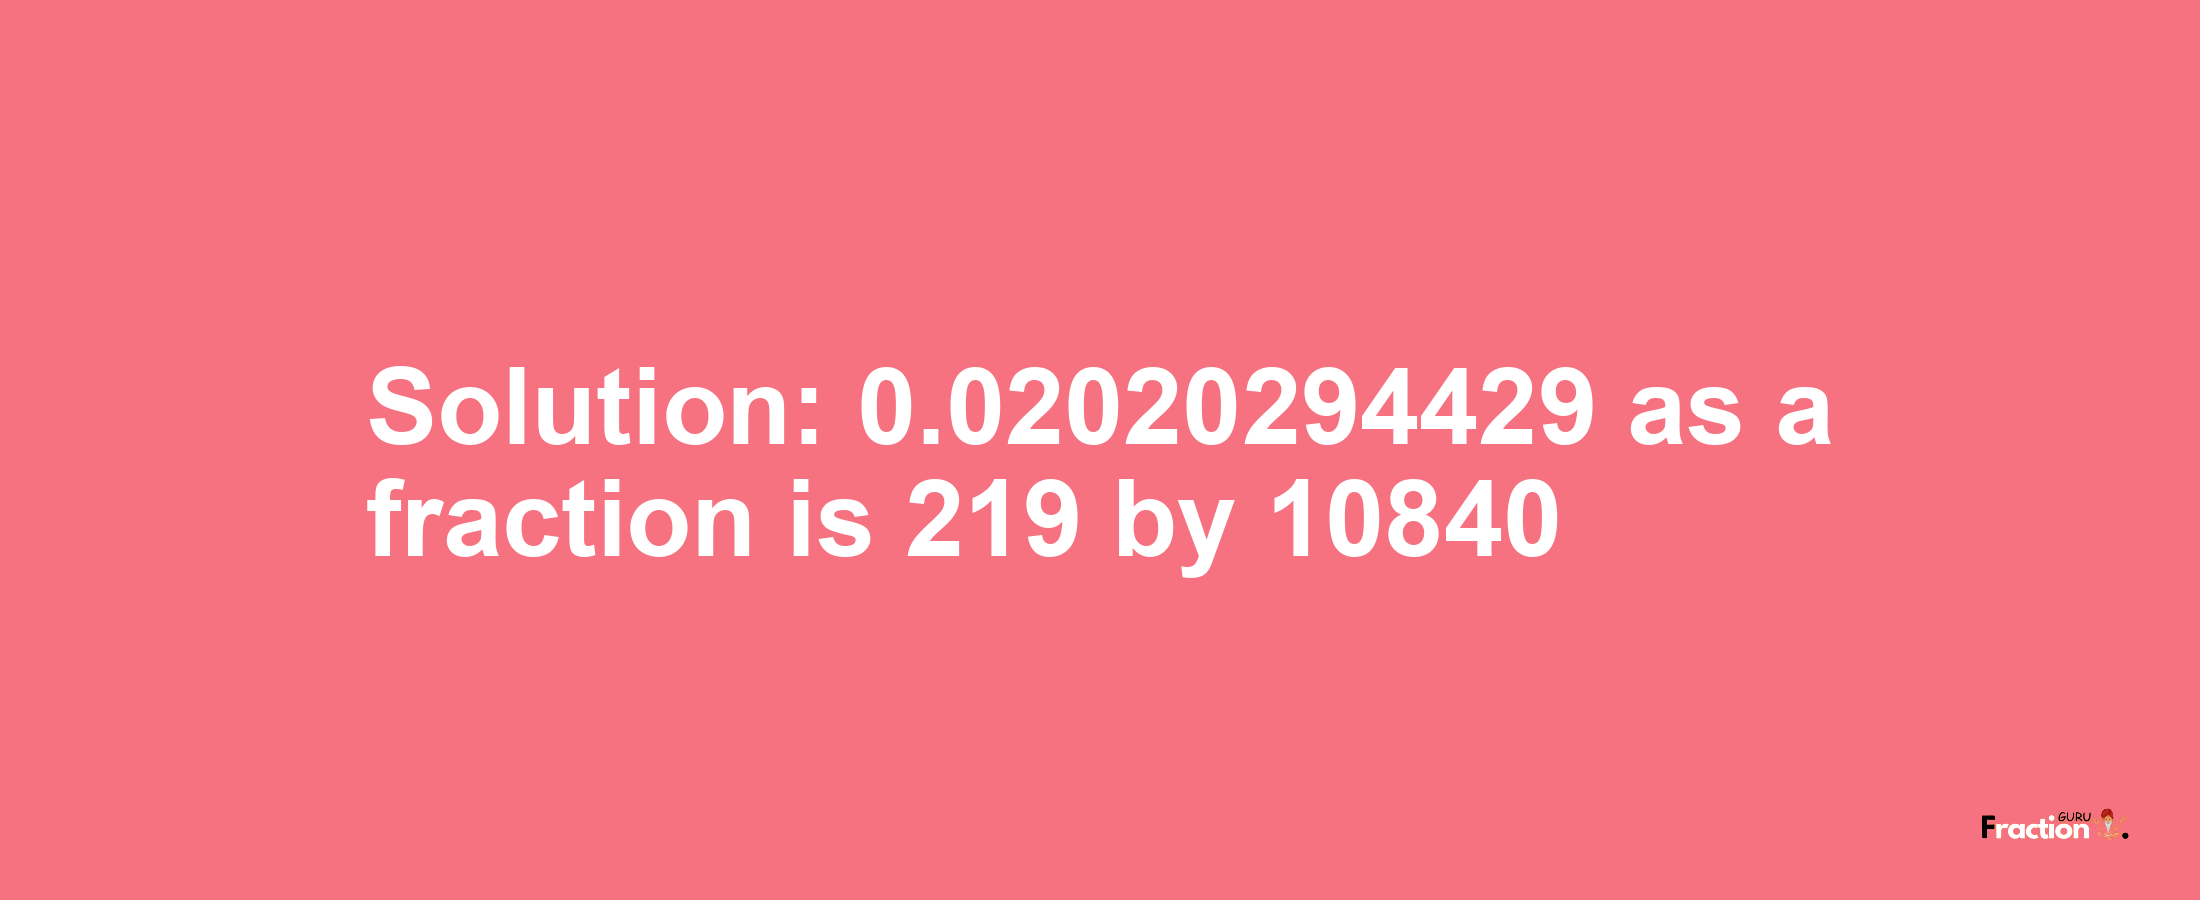 Solution:0.02020294429 as a fraction is 219/10840